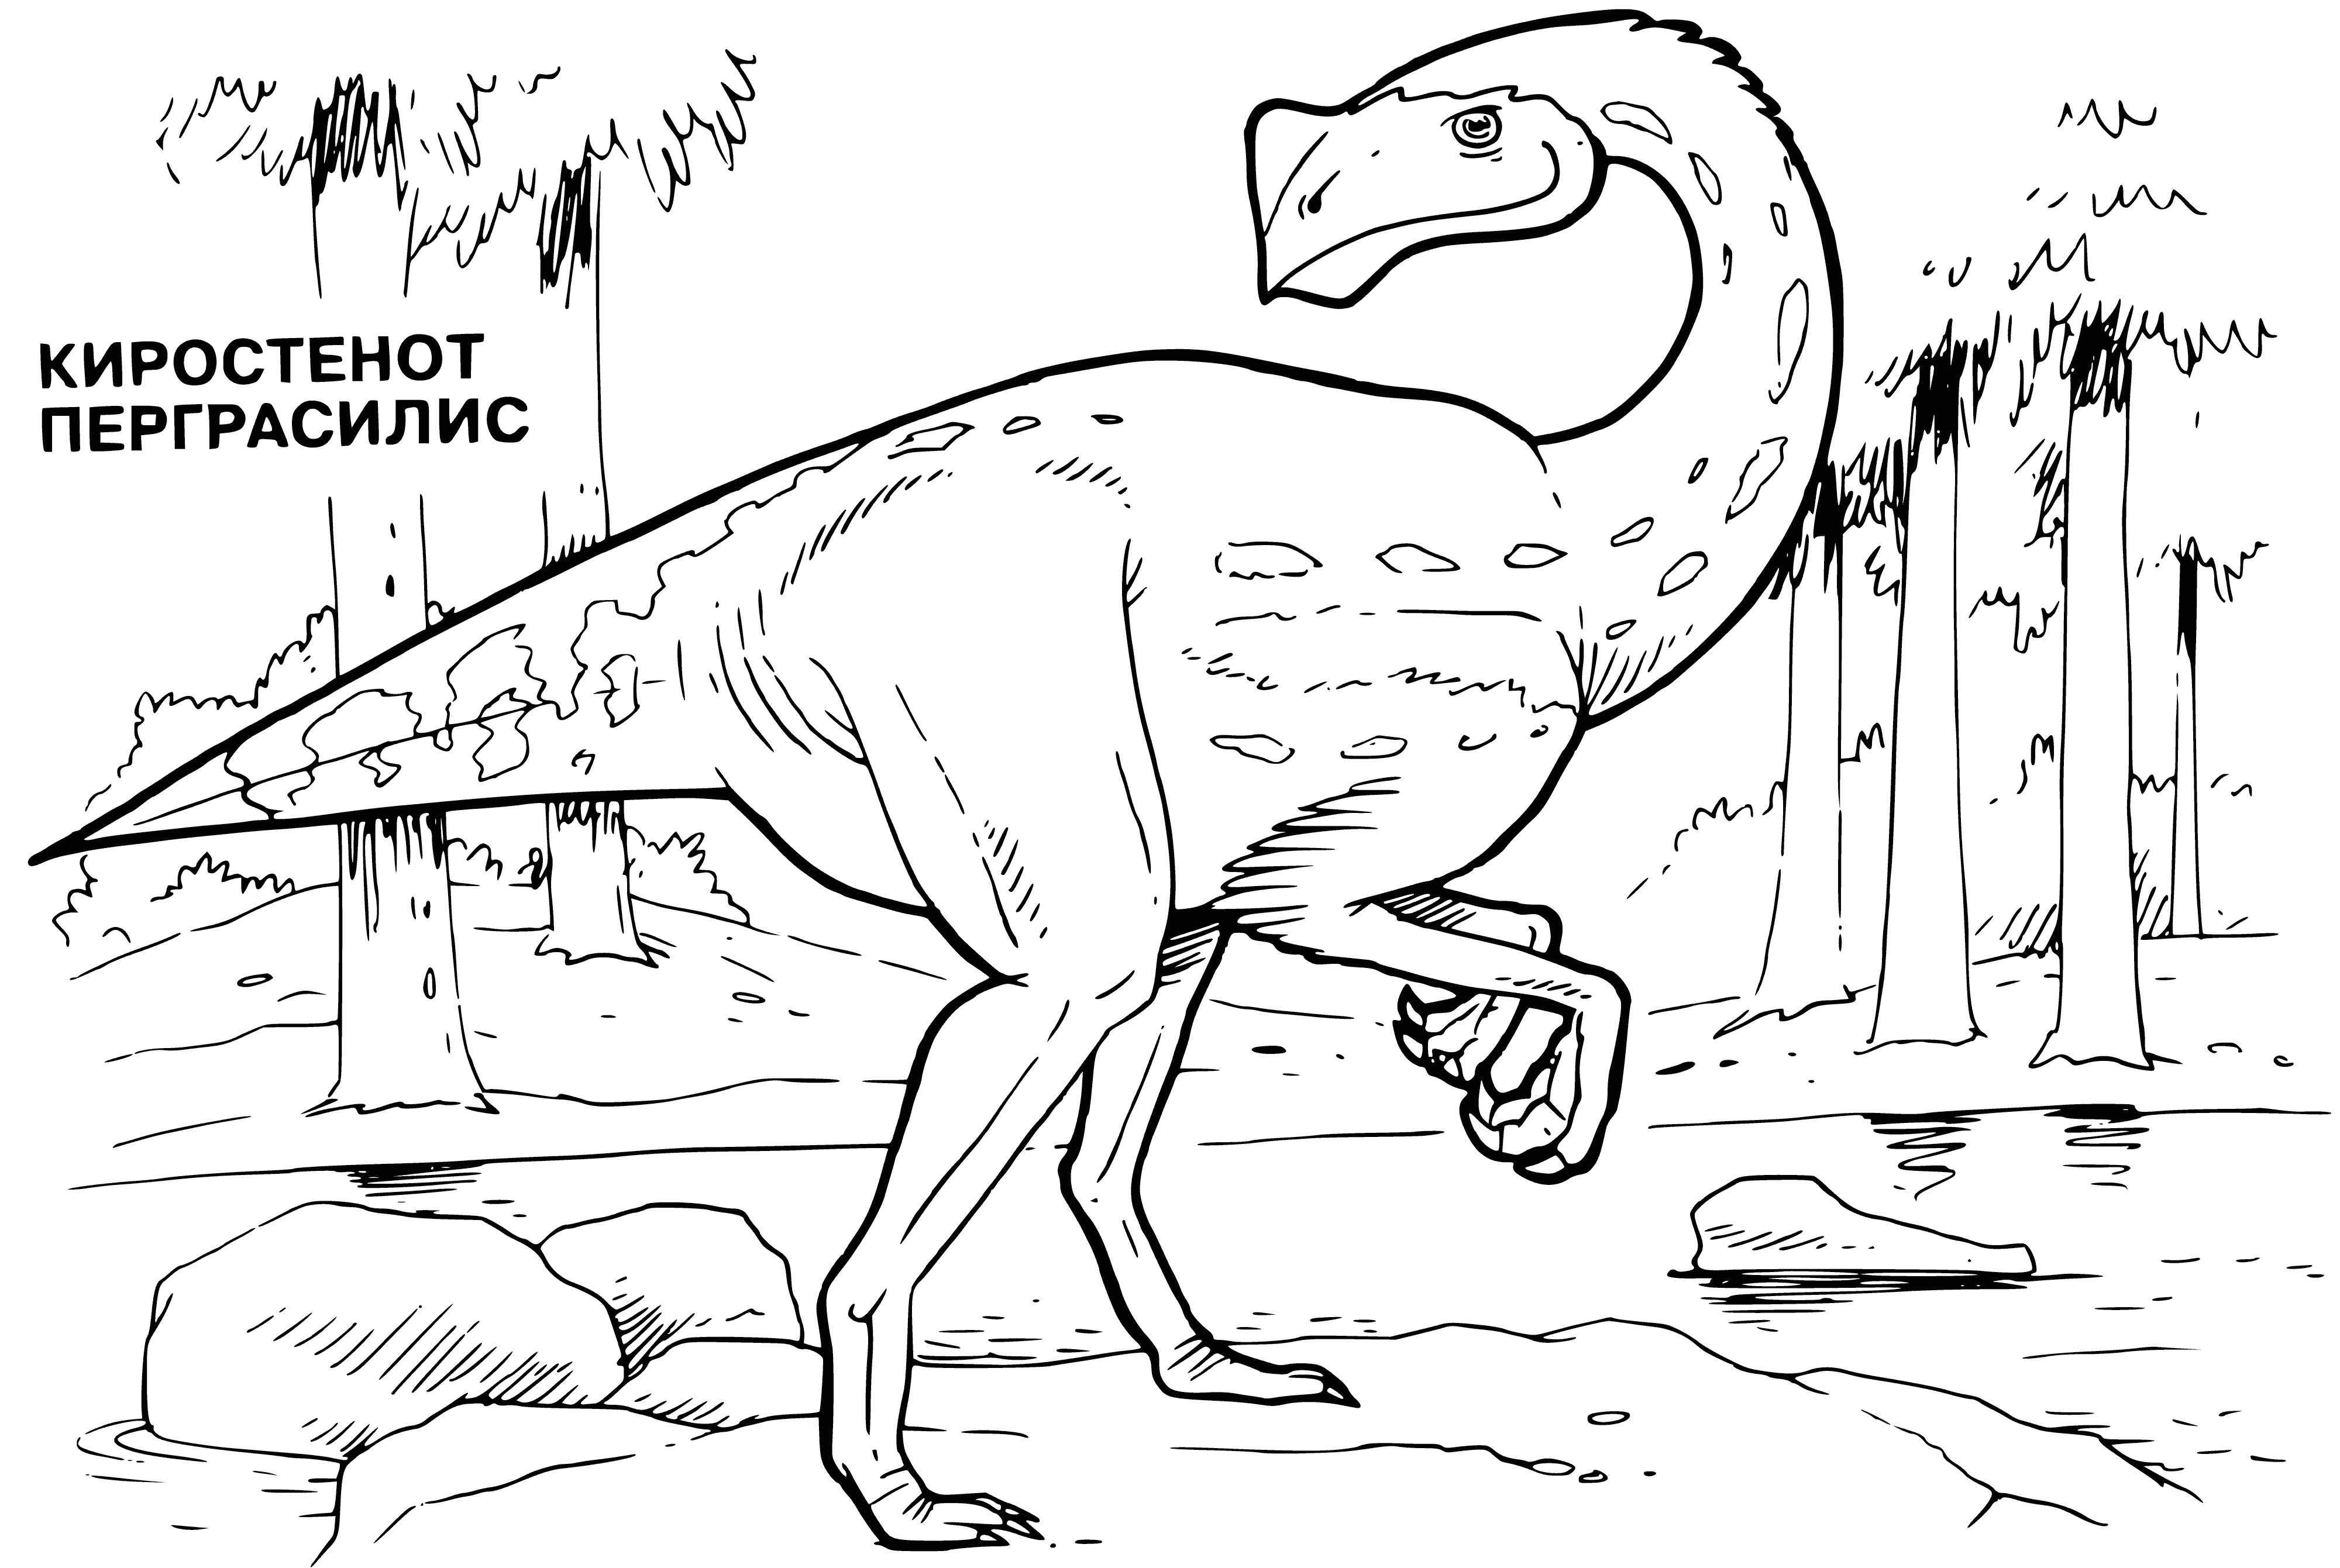 coloring page: Small, spiky-backed dino scuttles along with long tail, small head, beady eyes, small mouth with sharp teeth, & scaly, greenish-brown skin.